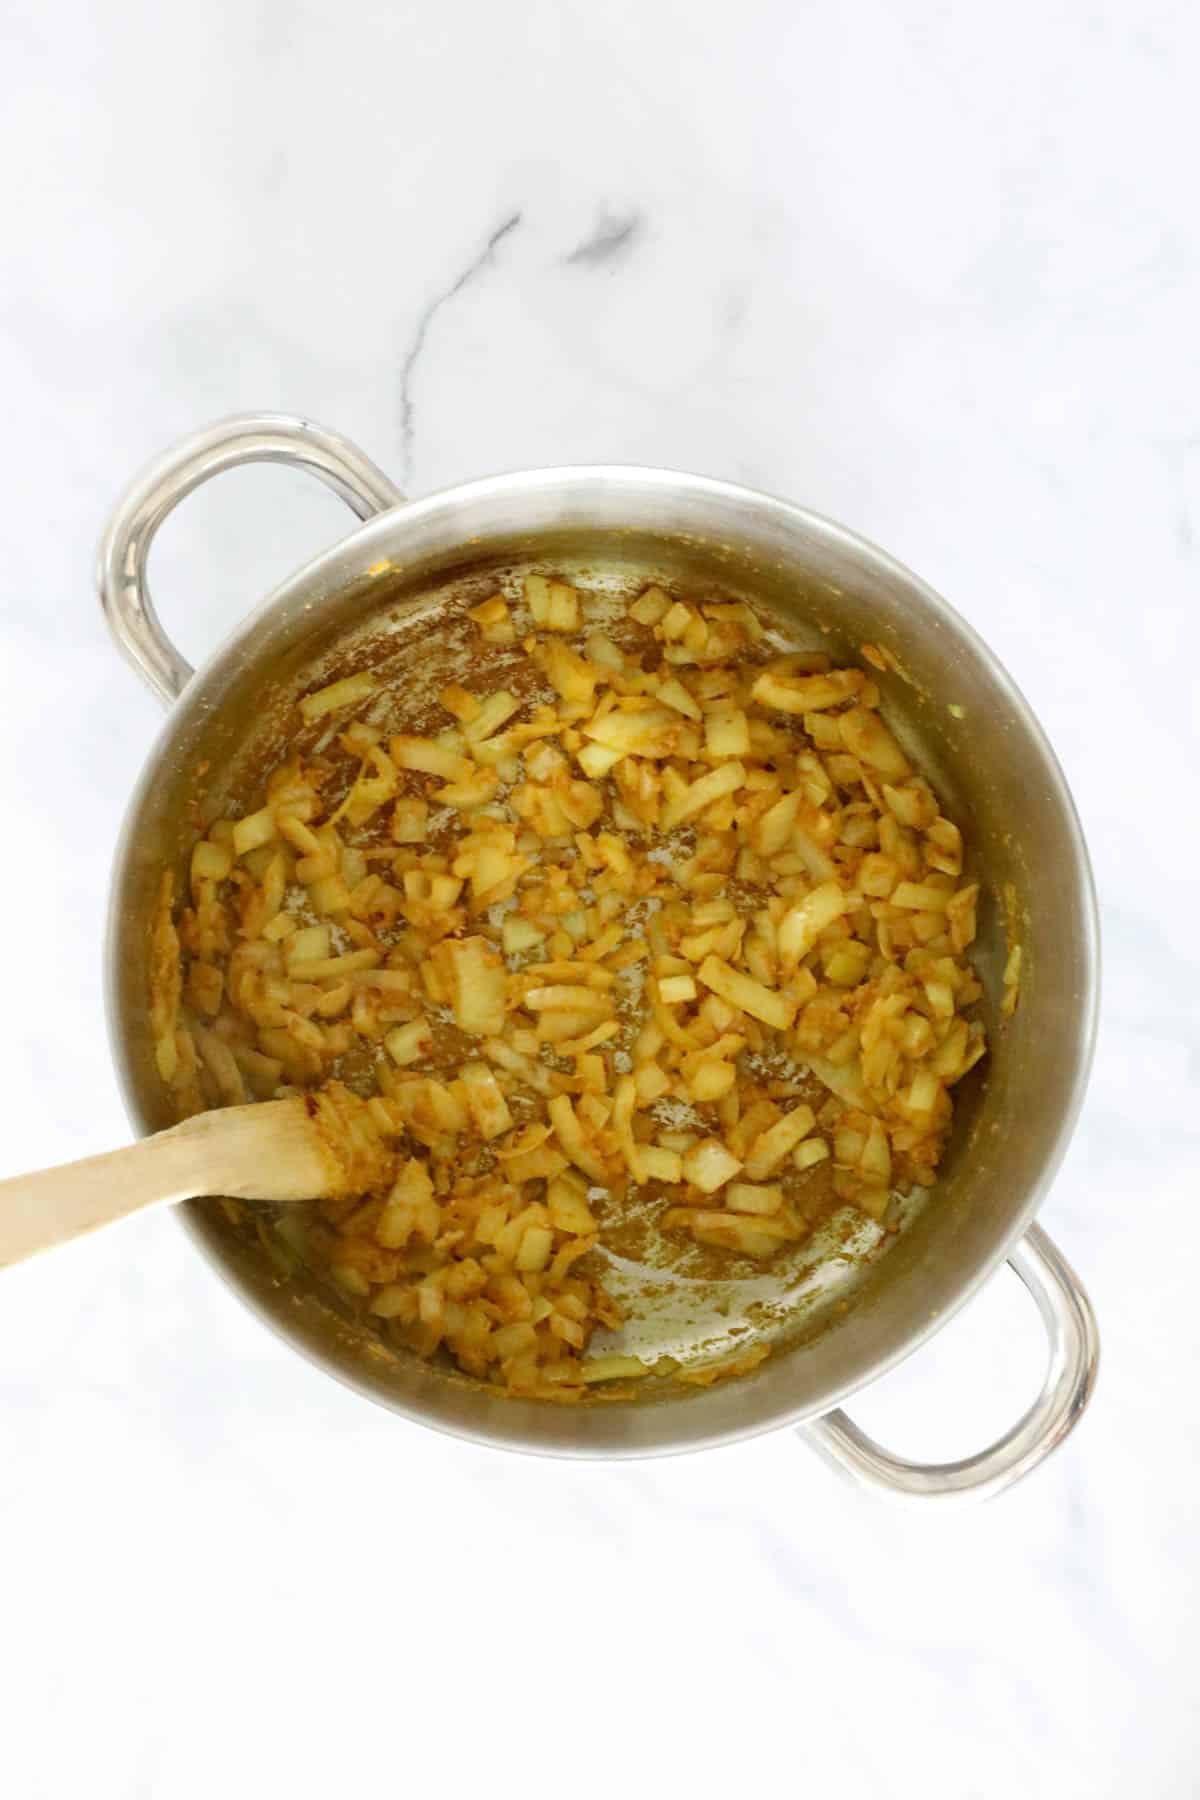 A pot with onion and spices being sauteed.